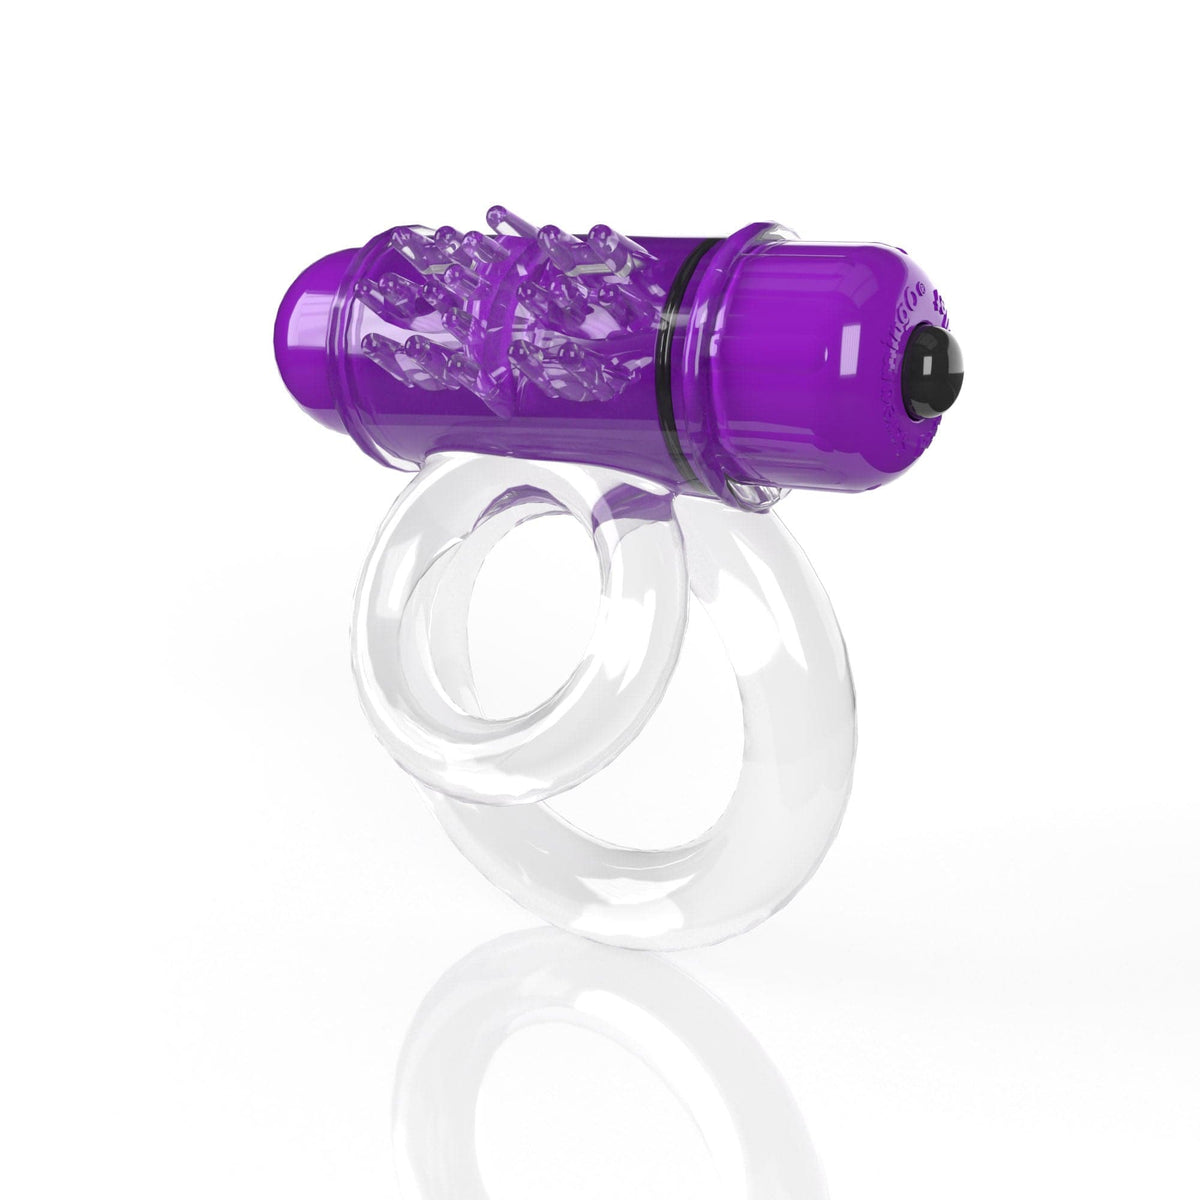 screaming o 4b double o super powered vibrating double ring grape